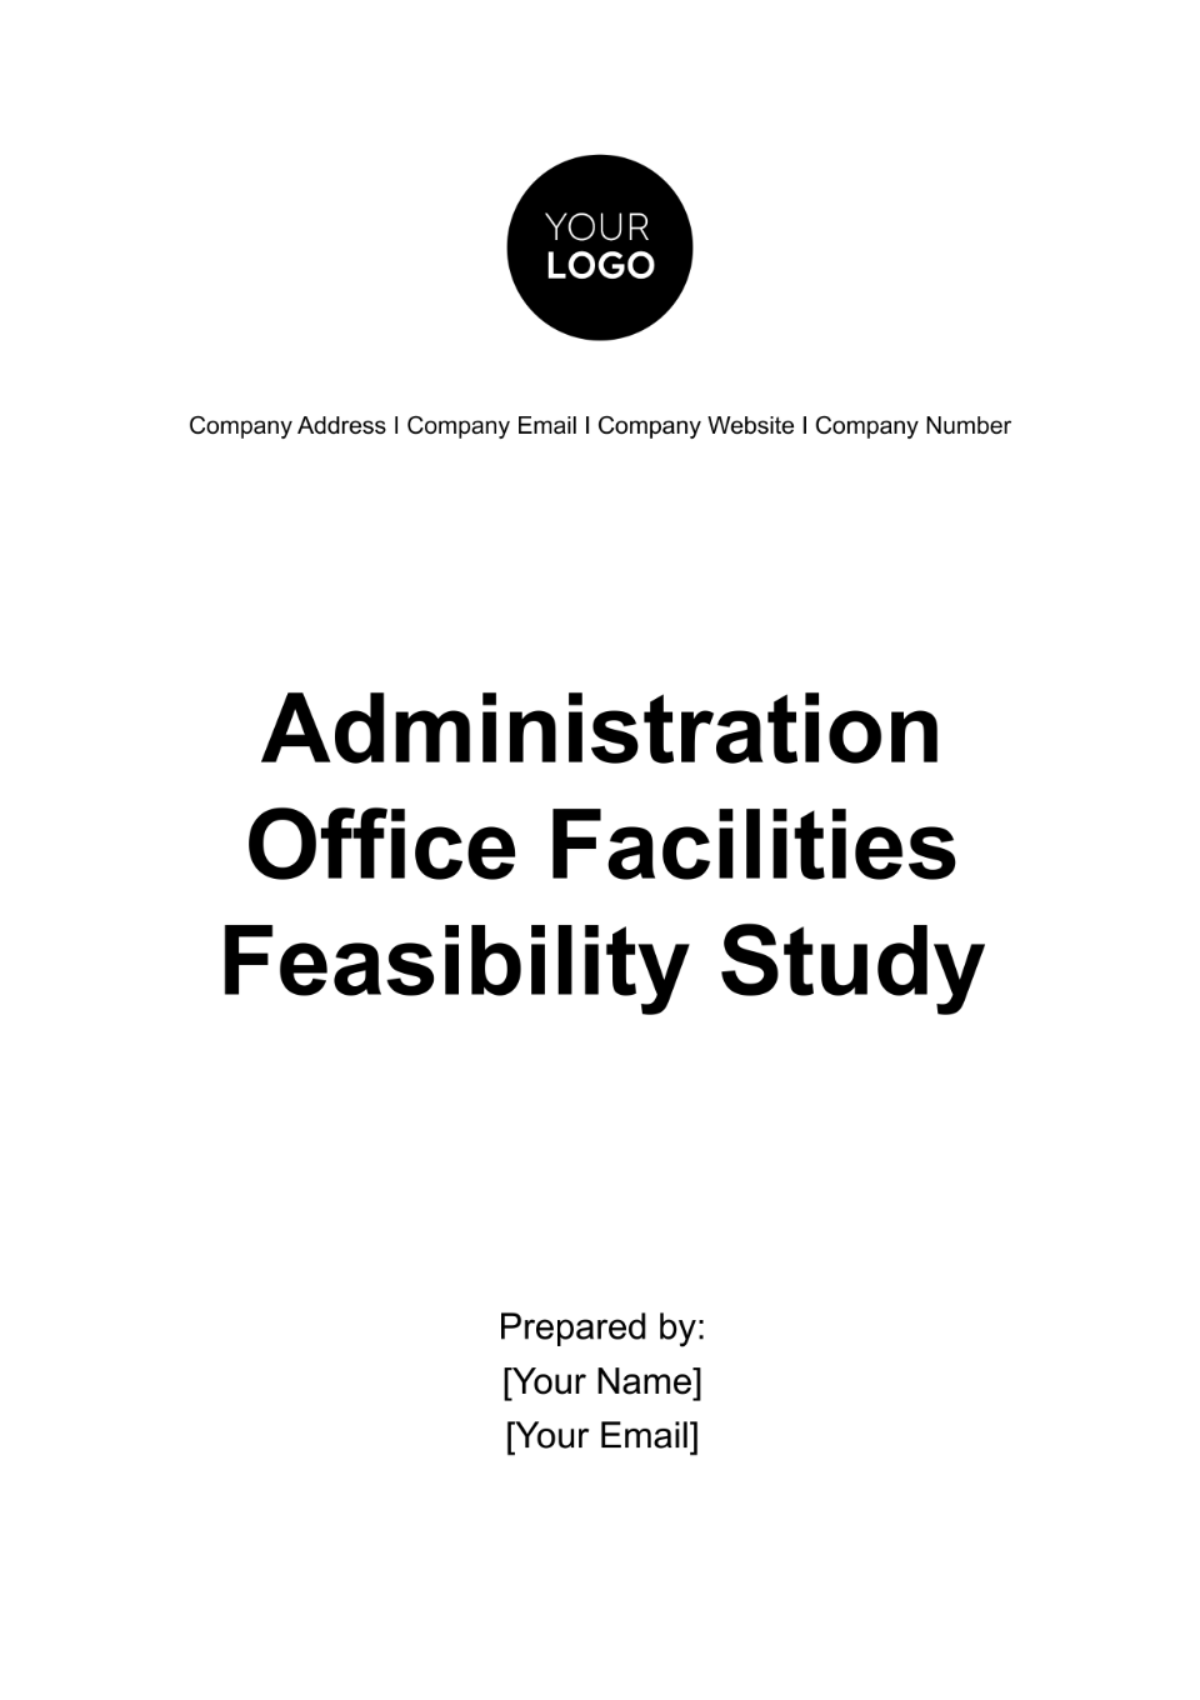 Administration Office Facilities Feasibility Study Template